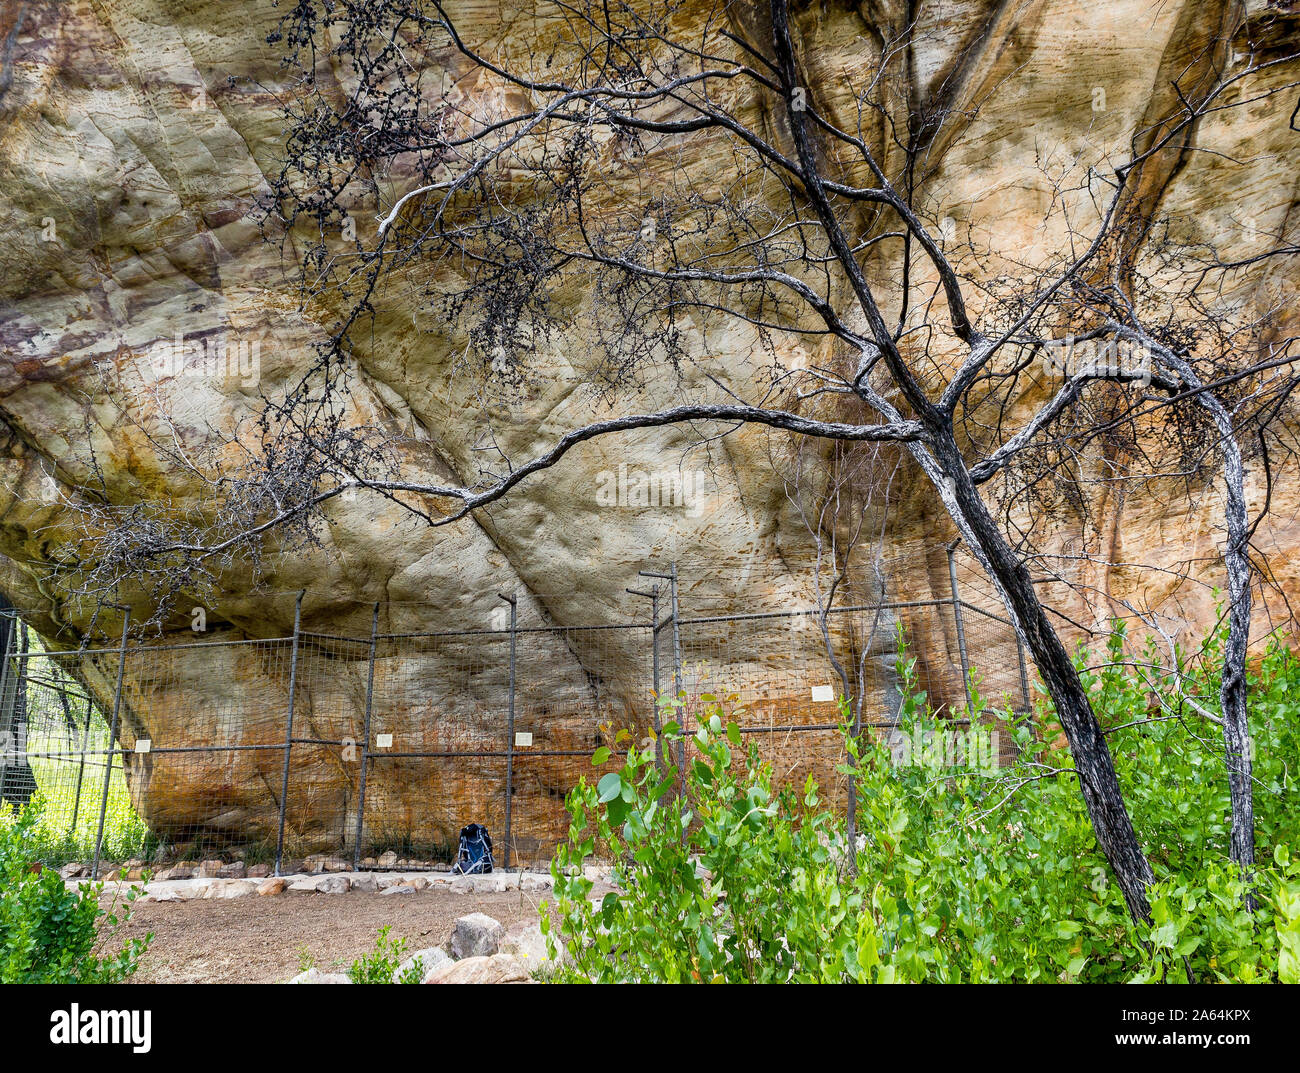 protected cave with a fence for Ancient Aboriginal Art: hand prints, animal herds, spiral, Grampians, australia Stock Photo